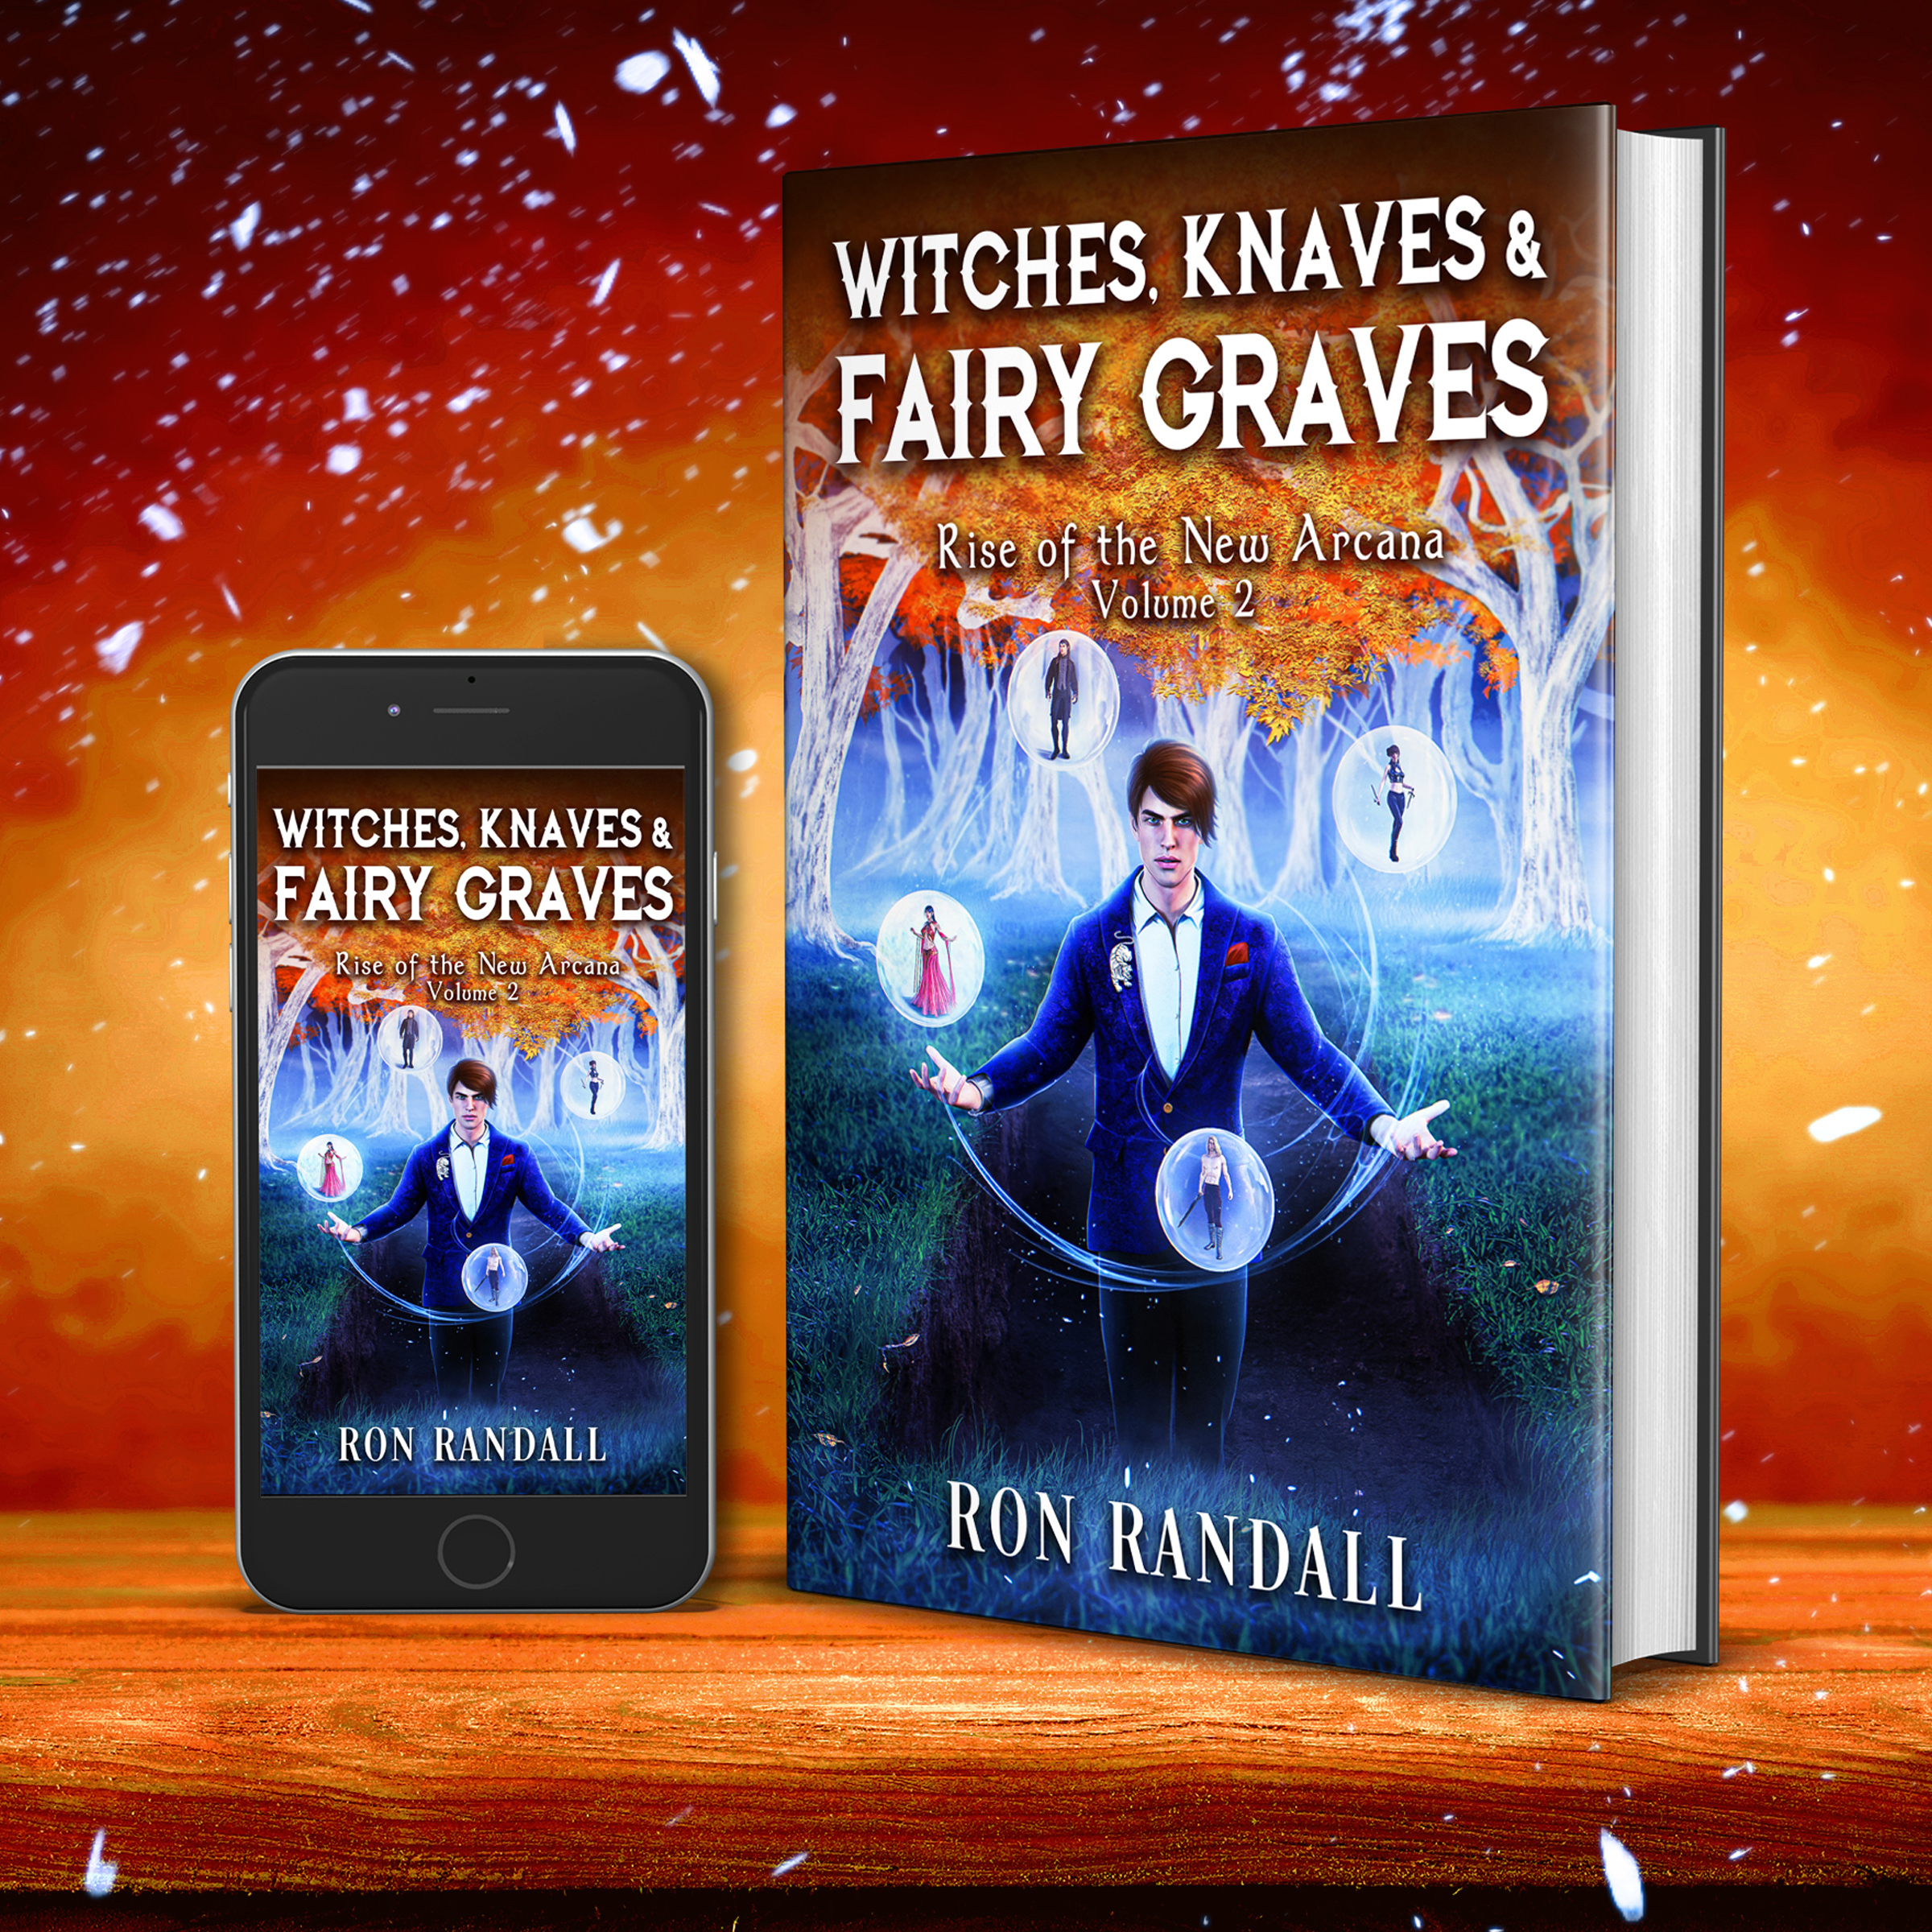 Witches, Knaves & Fairy Graves